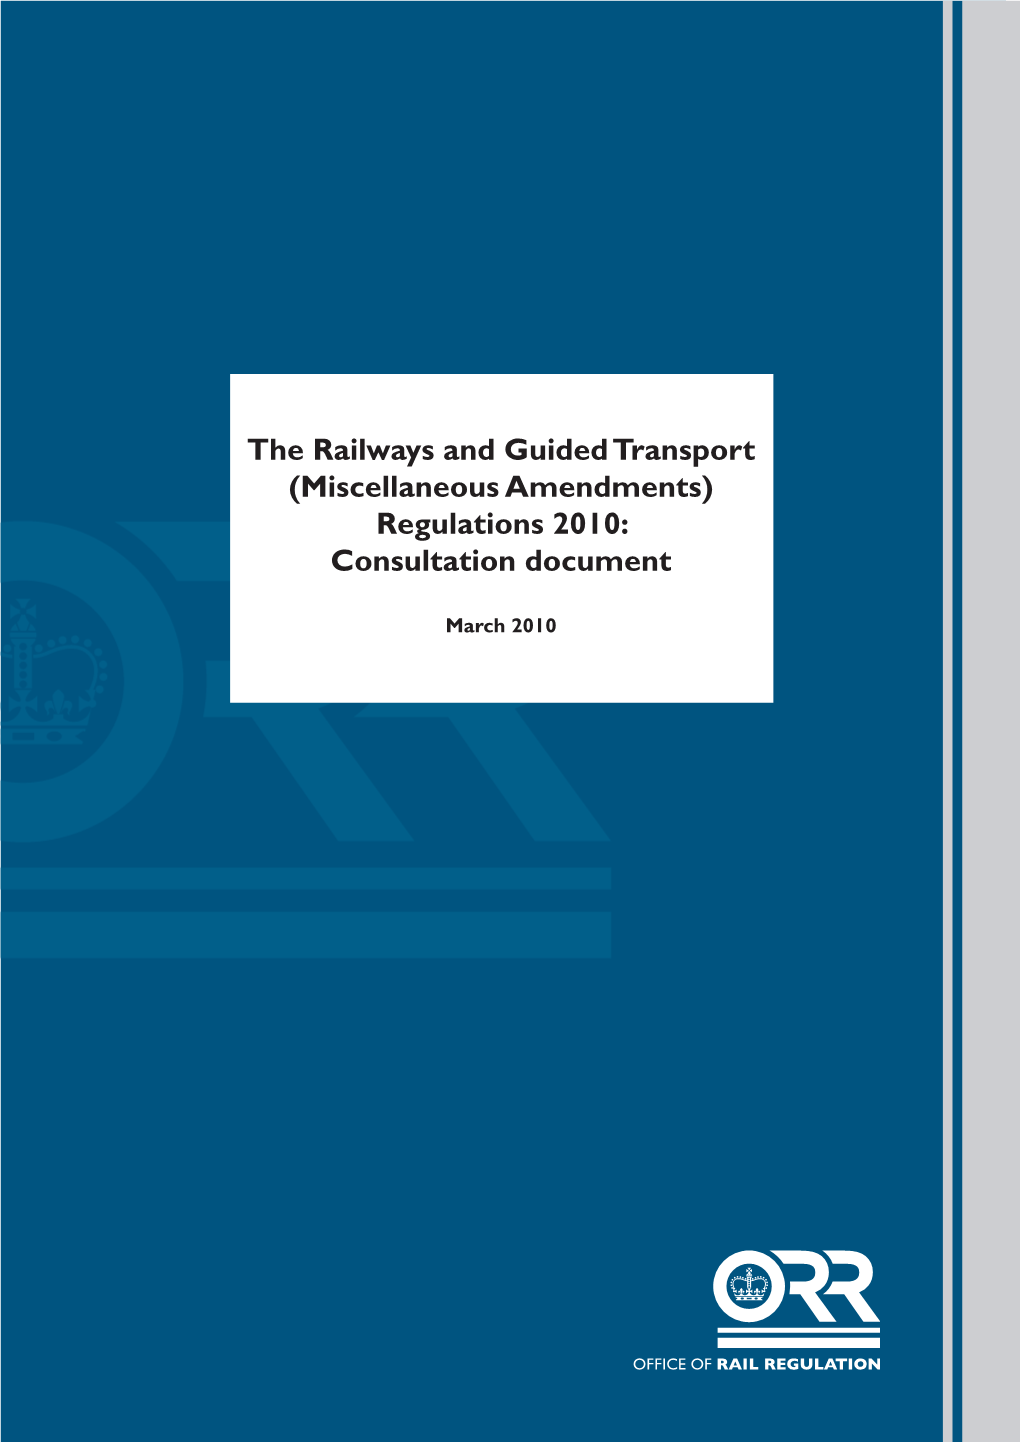 The Railways and Guided Transport (Miscellaneous Amendments) Regulations 2010: Consultation Document